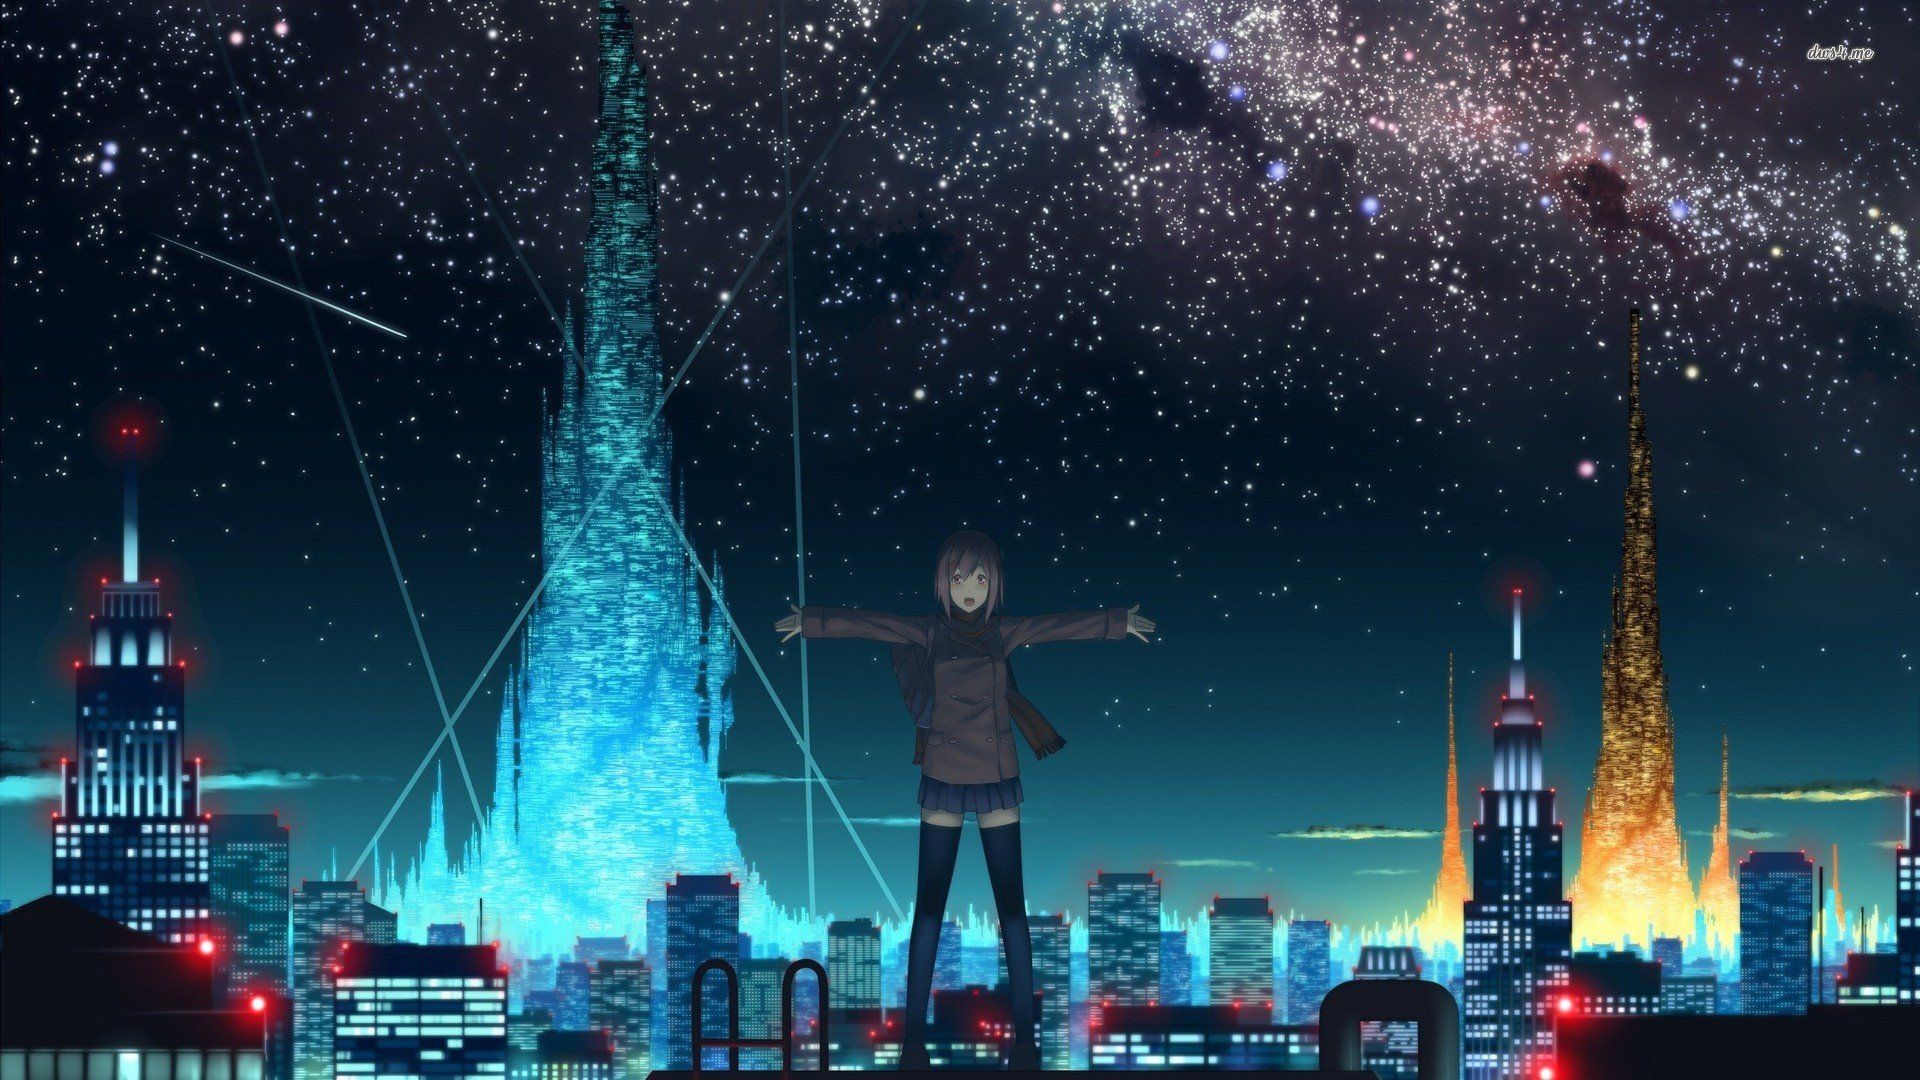 Anime Night Sky Scenery Wallpaper Download | MobCup